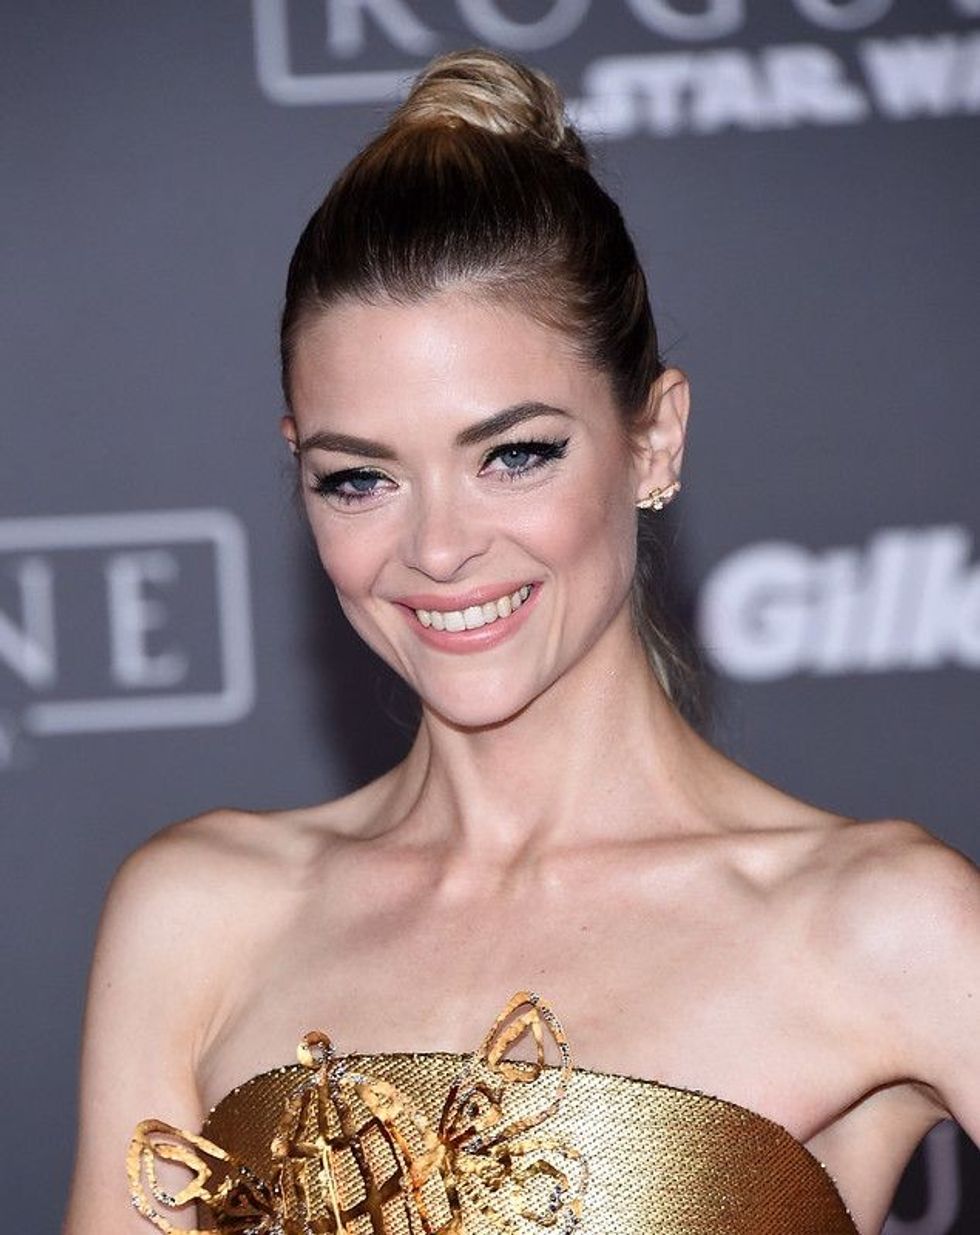 Jaime King is the daughter of beauty queen, Nancy King, and Robert King. She is famous for her acting in movies.